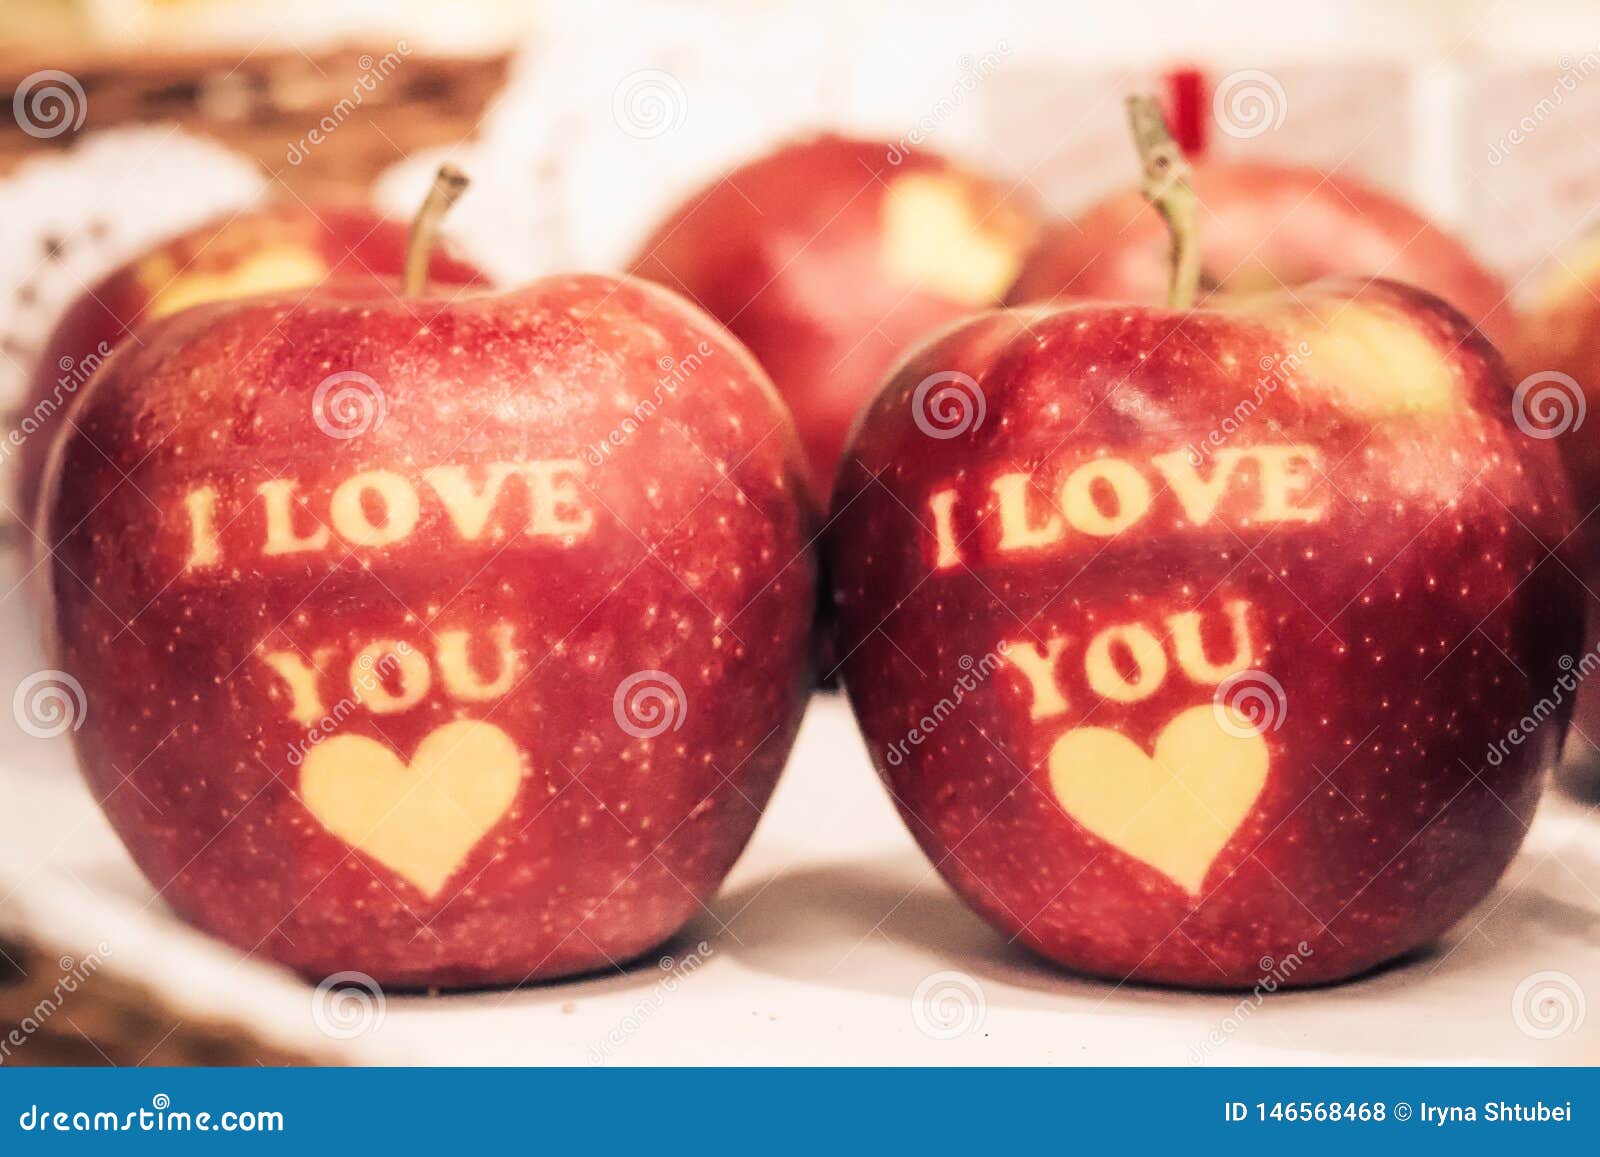 i love you writen on red apples